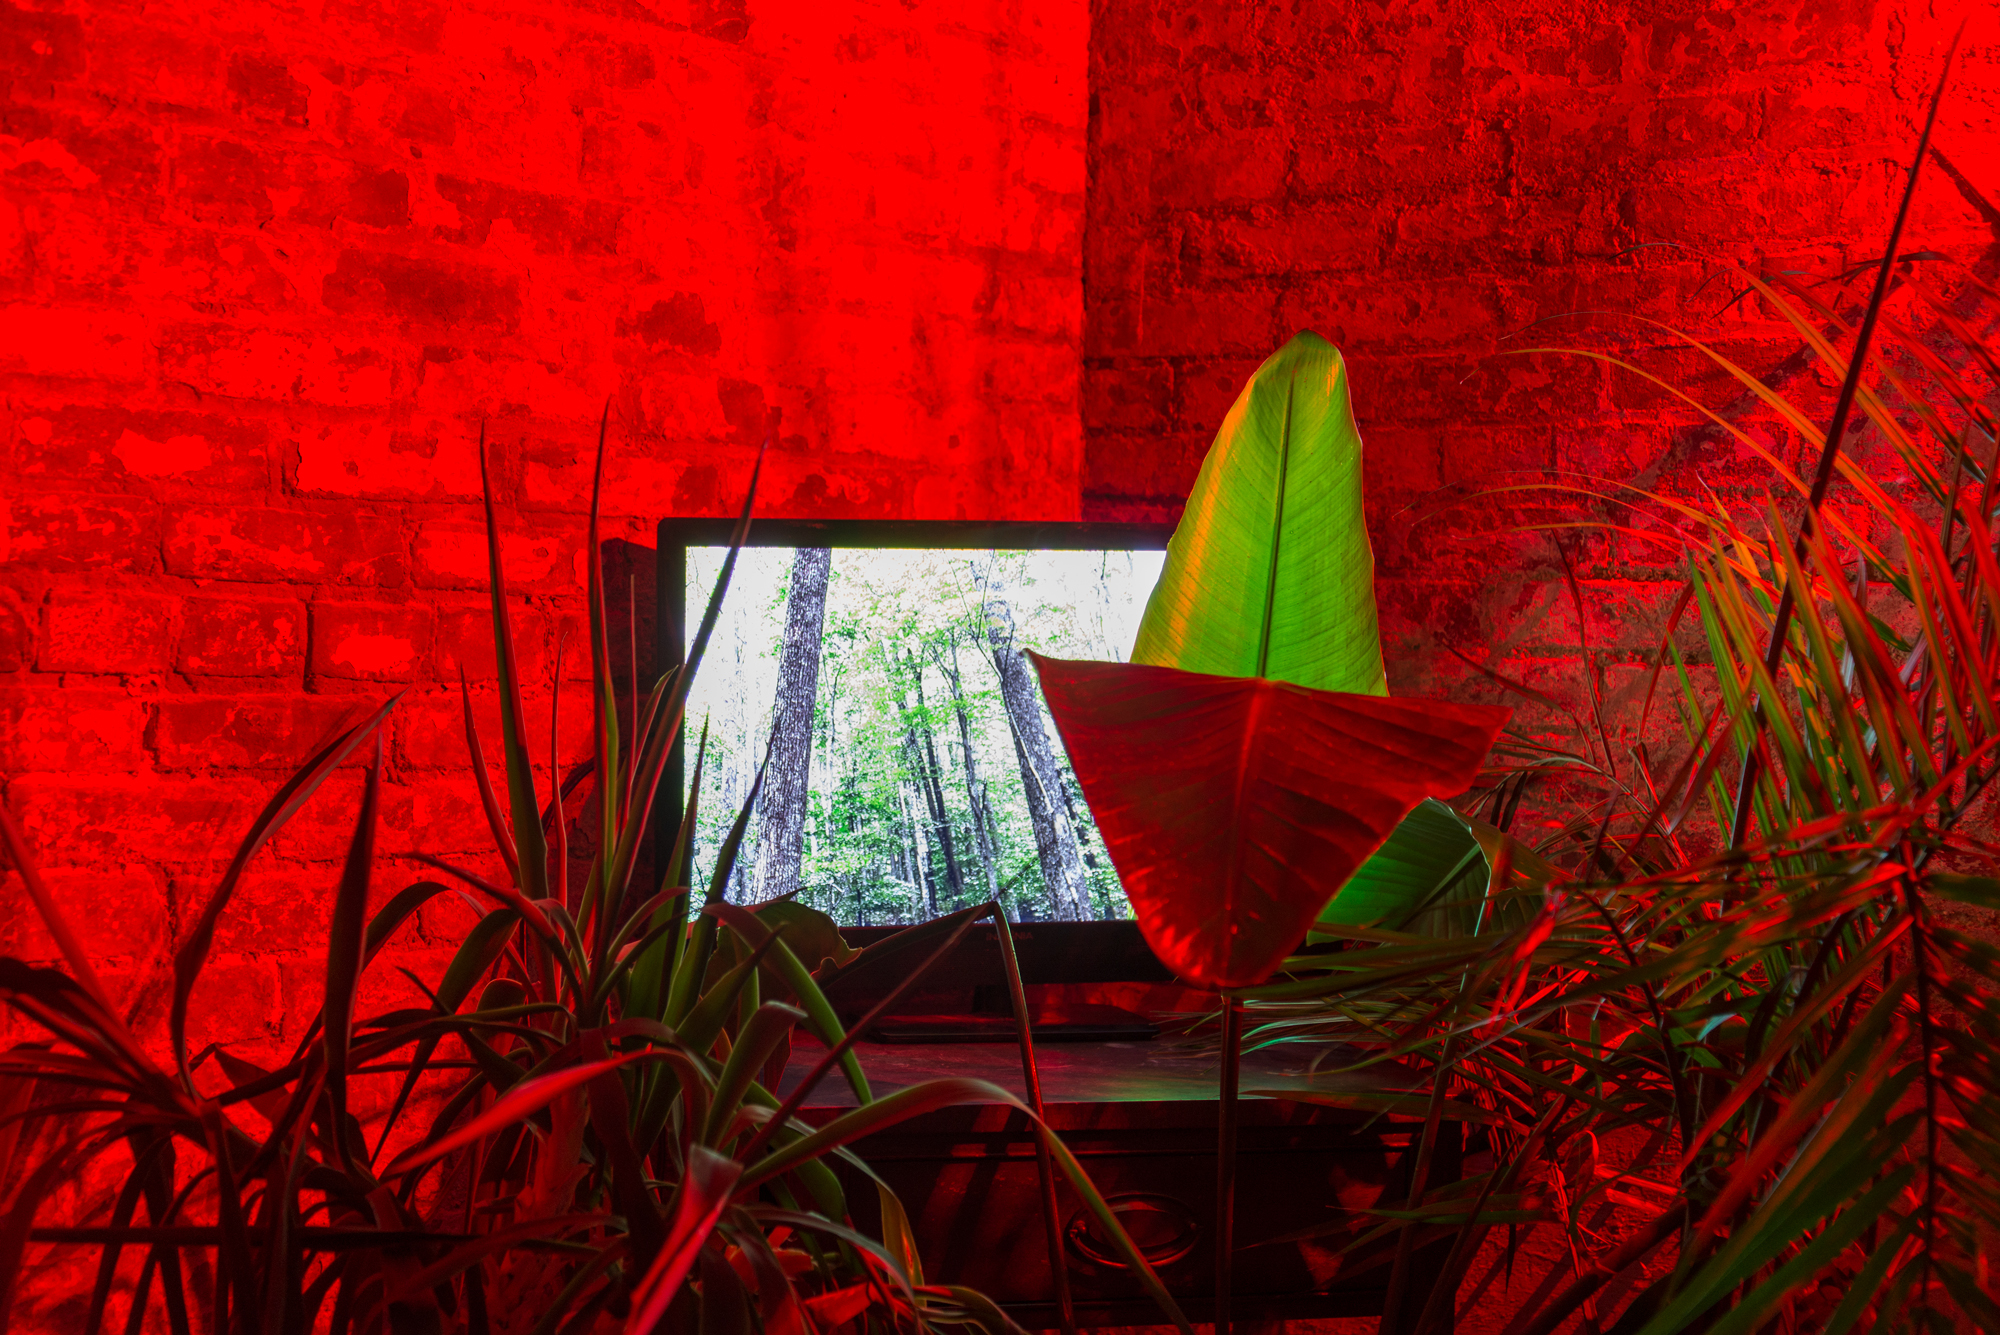 Disconnect to Reconnect (The hidden and unseen), 2017, moving image on flat screen installed with assorted plants, and red light; dimensions vary according to space.